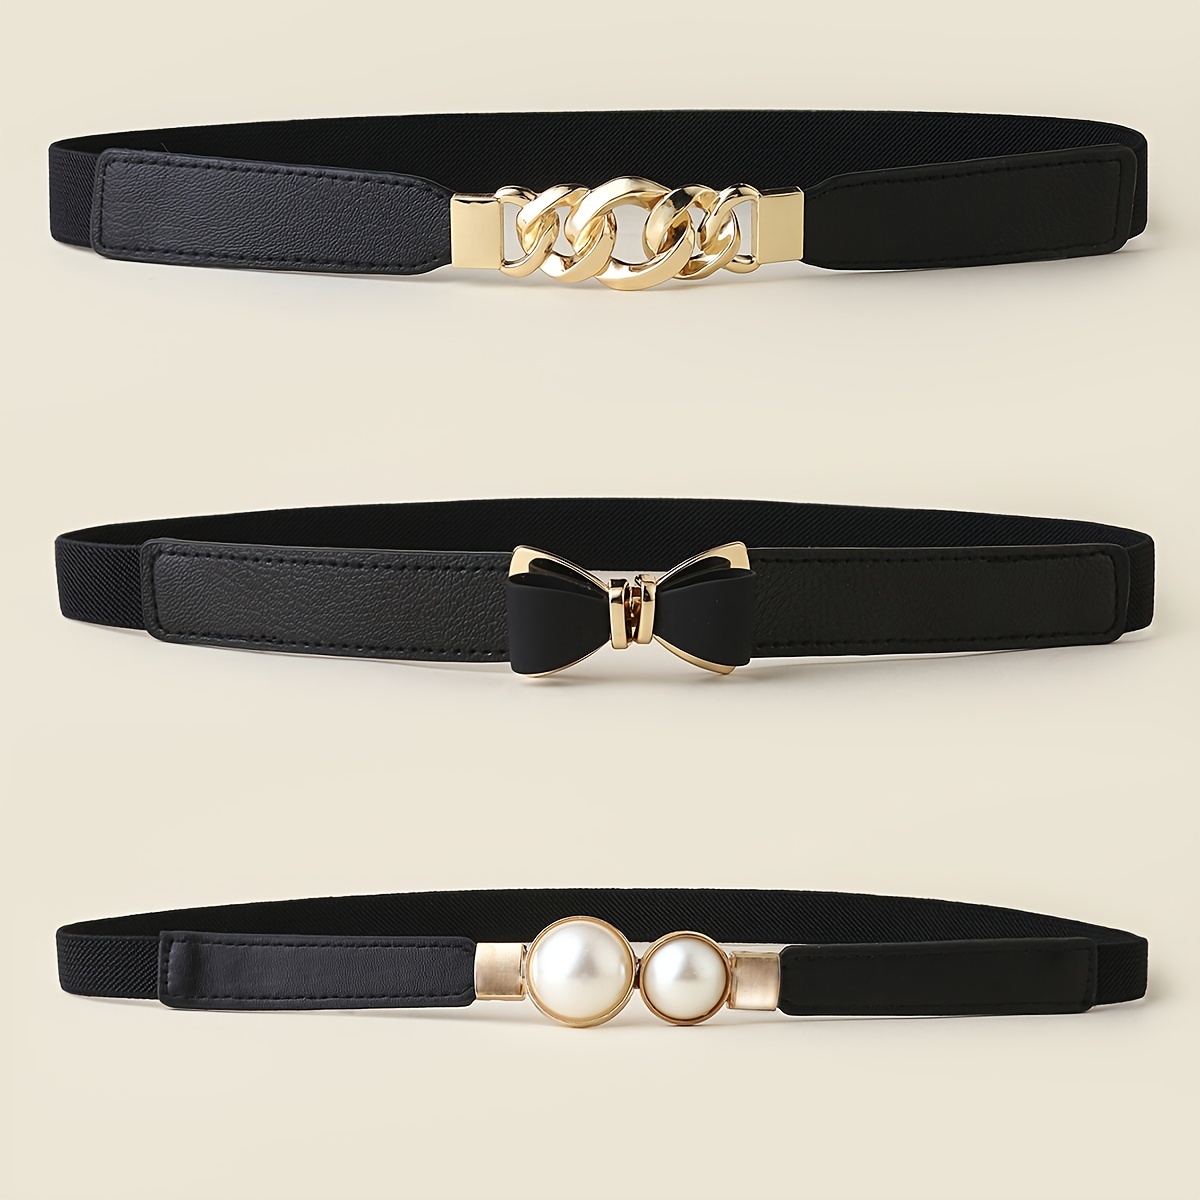 

3pcs Elastic Stretch Waist Belts Cinch Waistband With Metal Imitation Pearl Buckle For Coat Dress Jeans